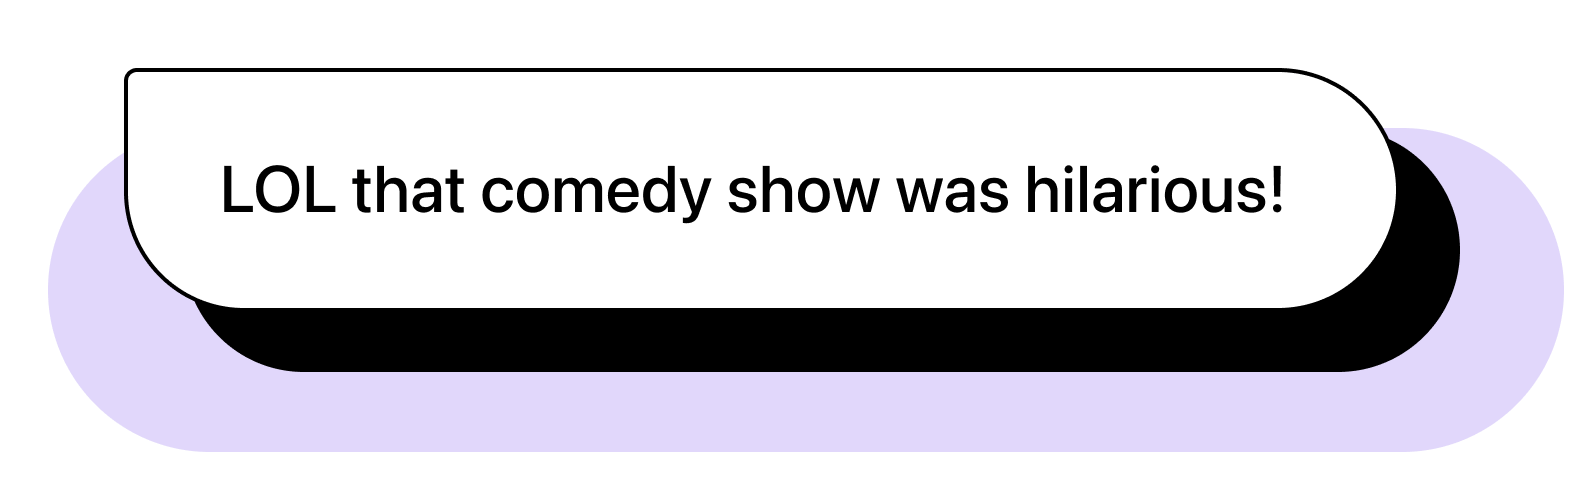 Chat bubble graphic with text "LOL that comedy show was hilarious!"